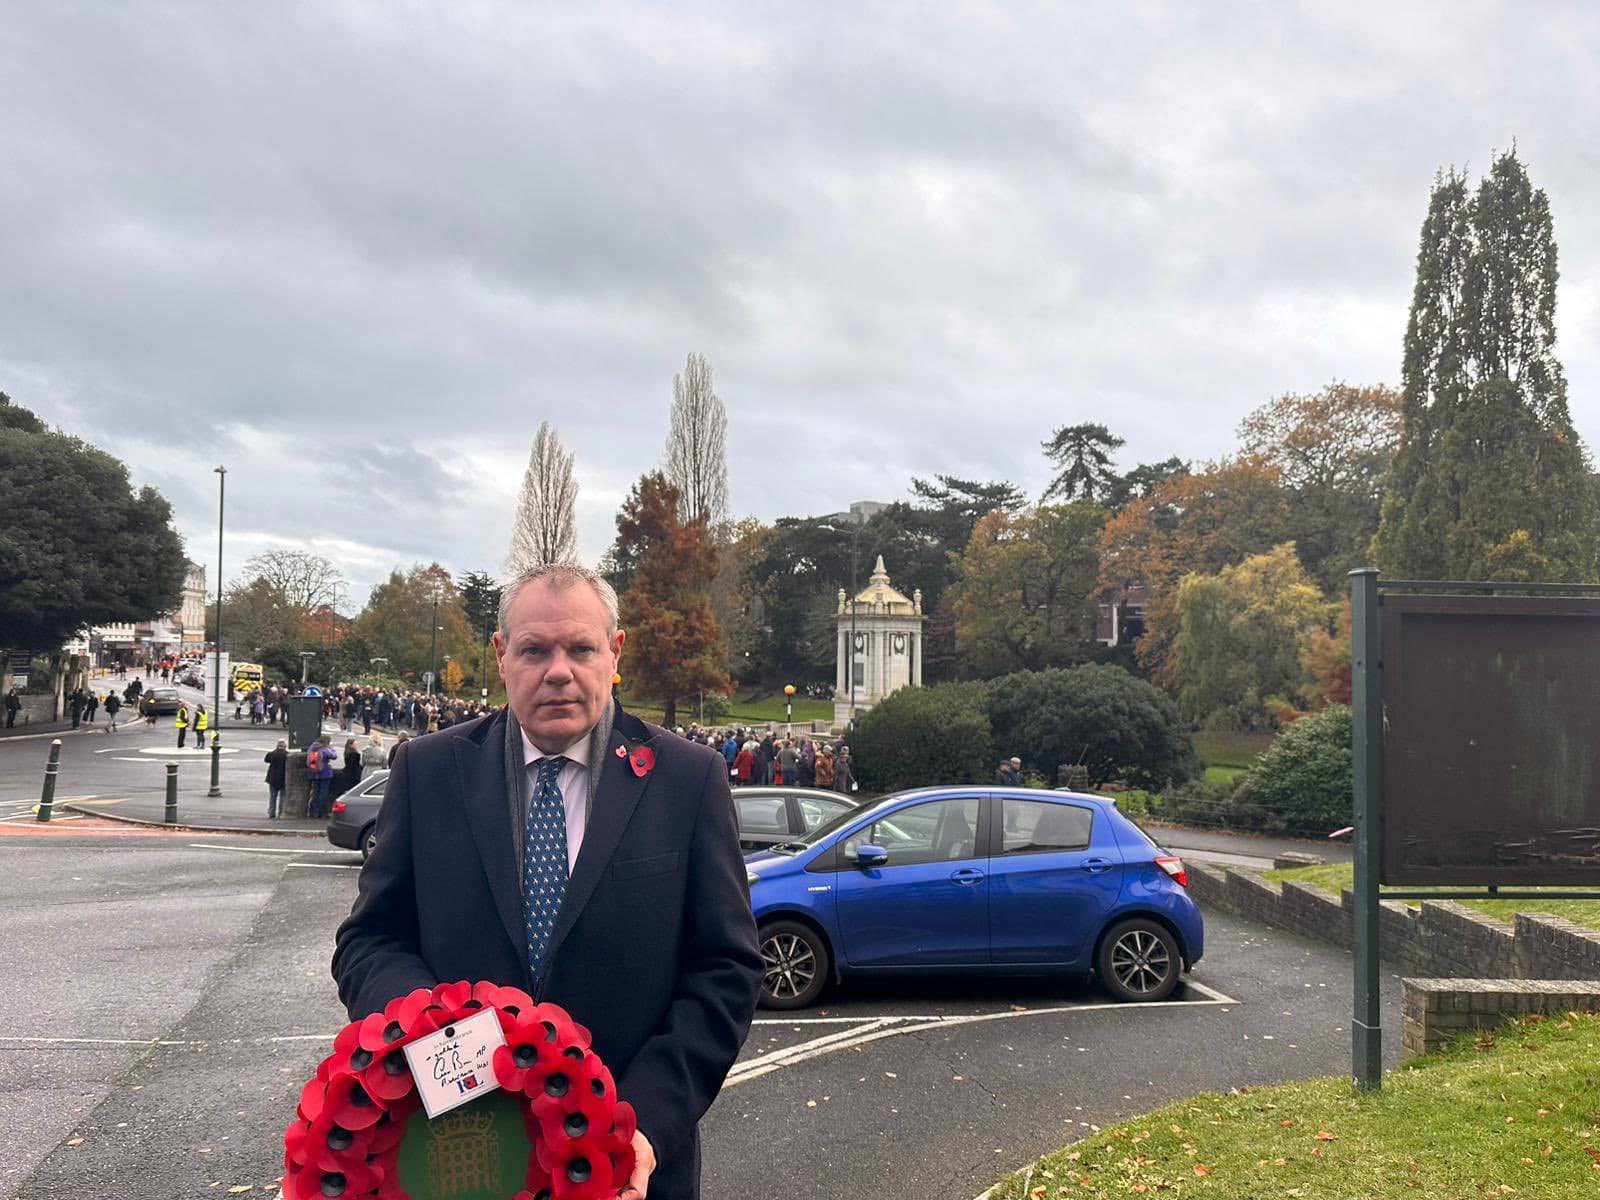 Conor holding a wreath ahead of the Remembrance parade